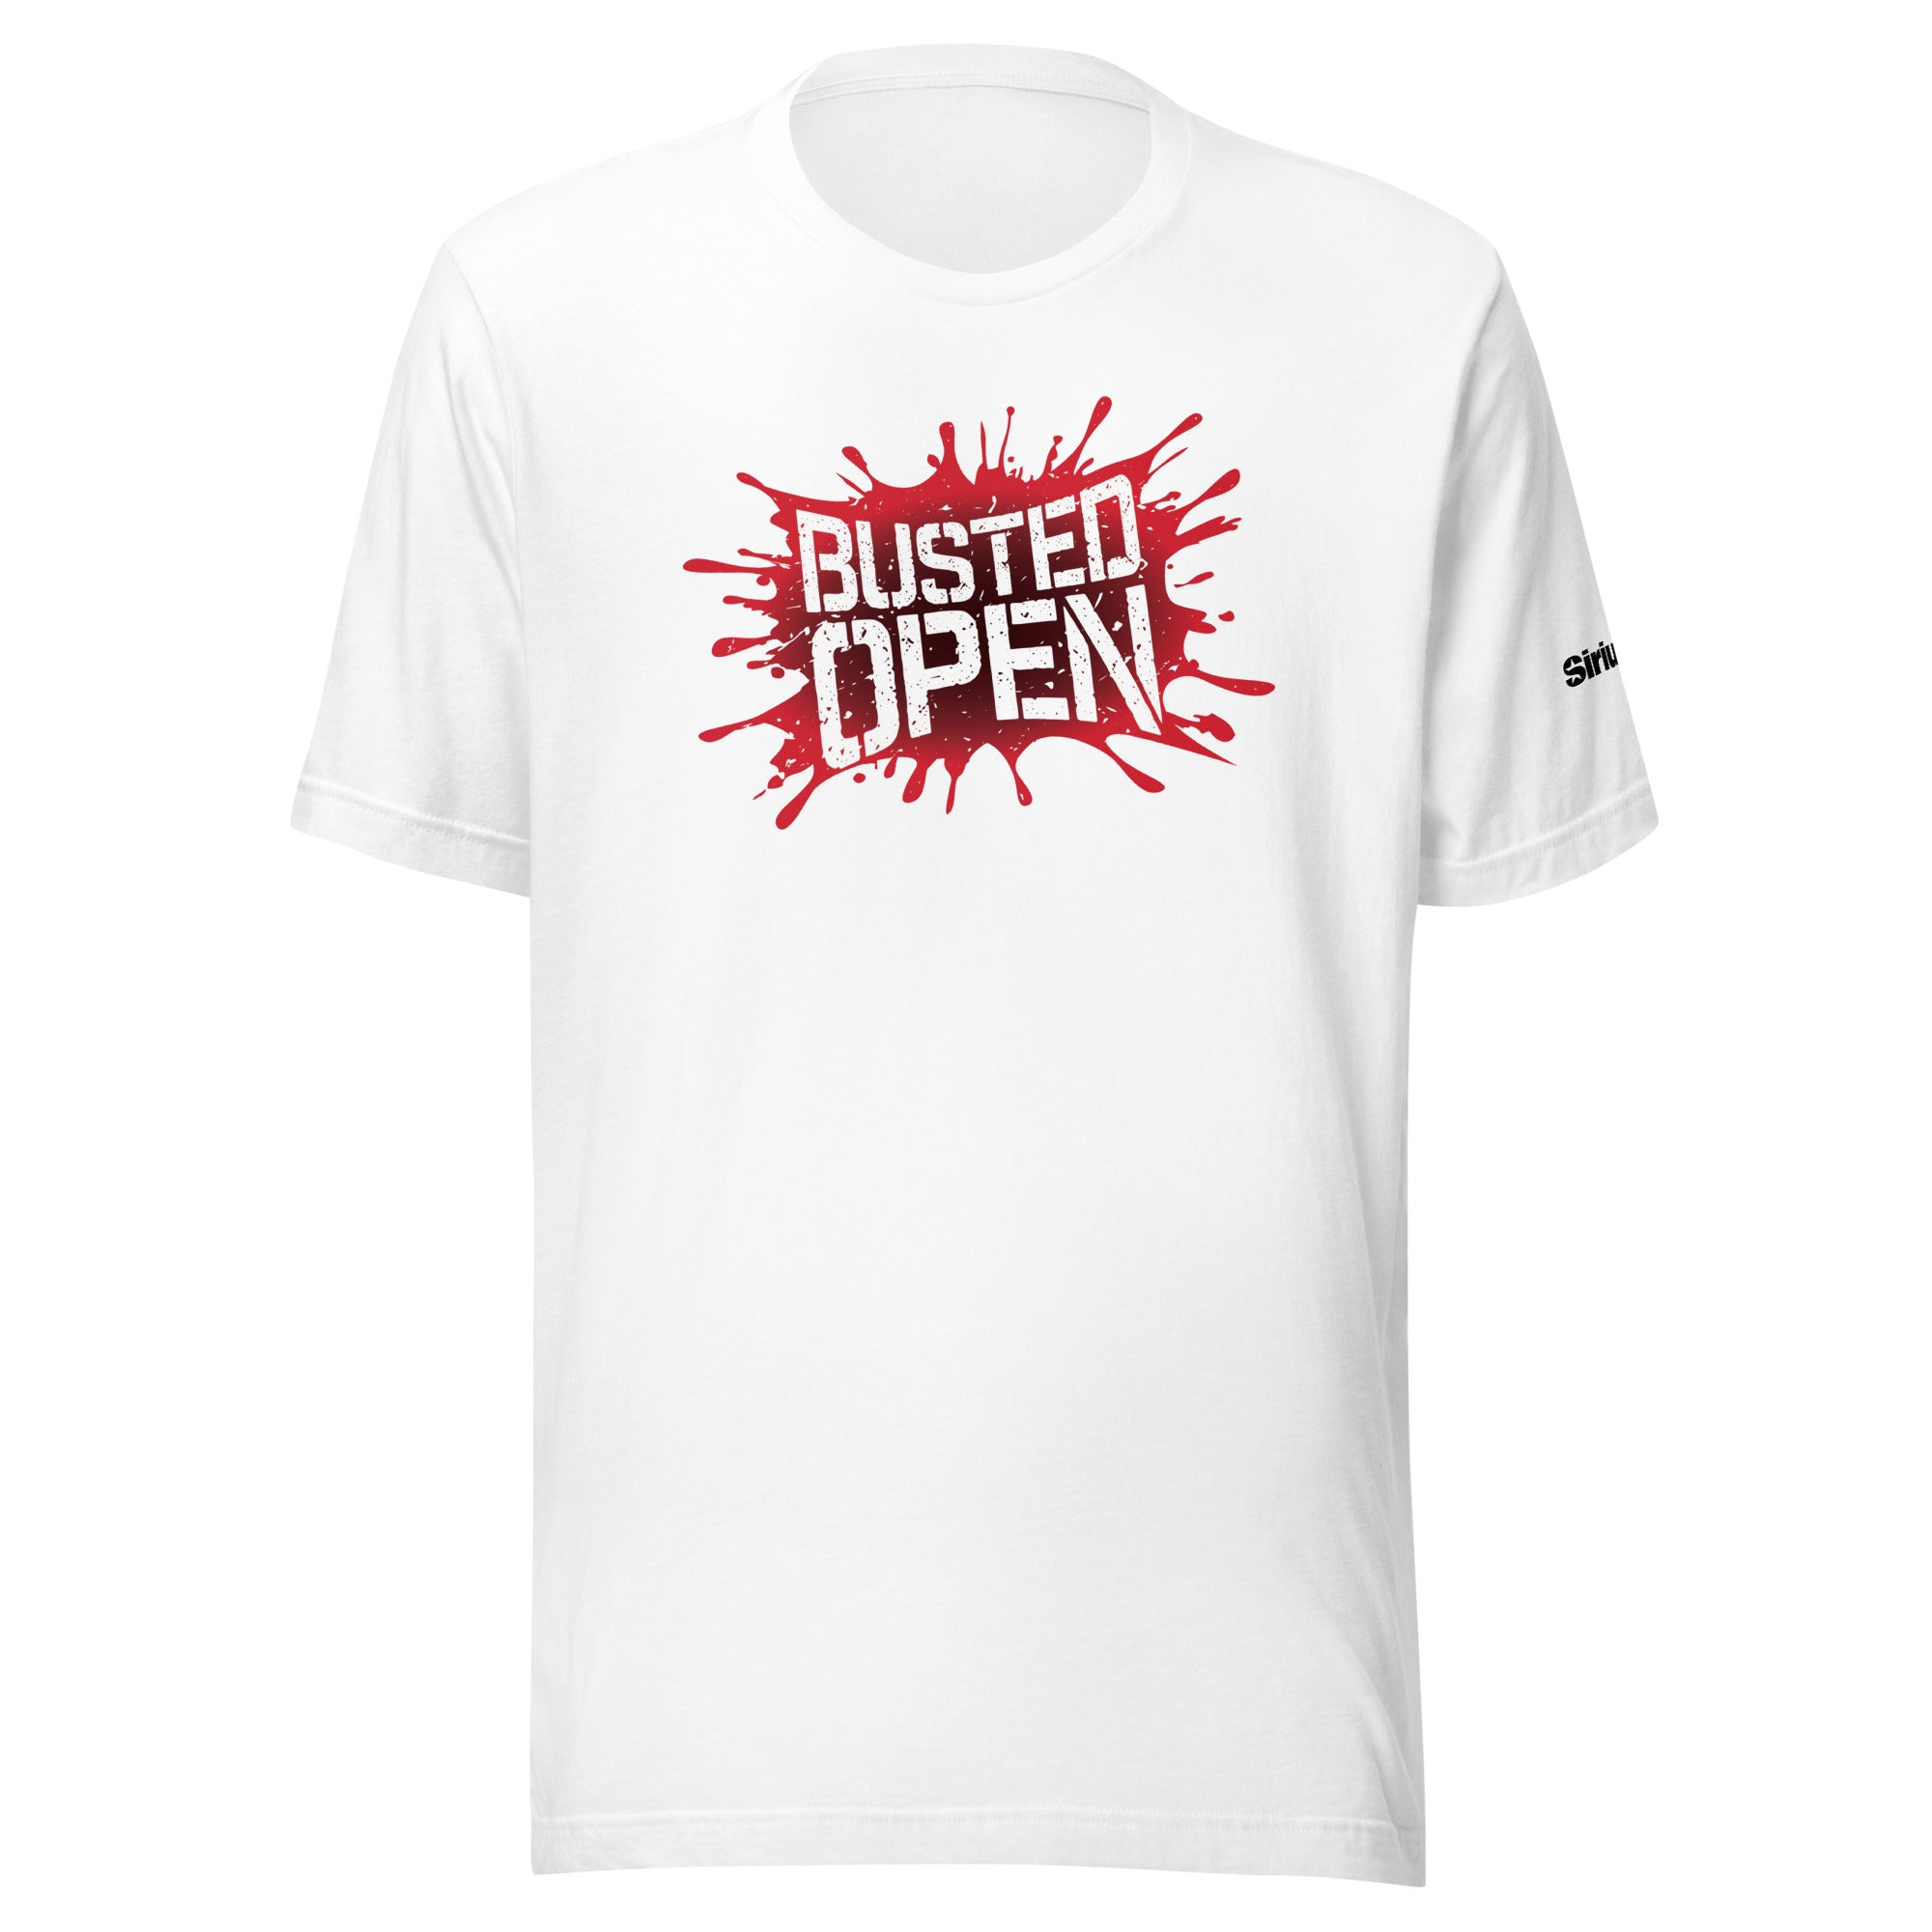 Busted Open: Bloody Good T-shirt (White)